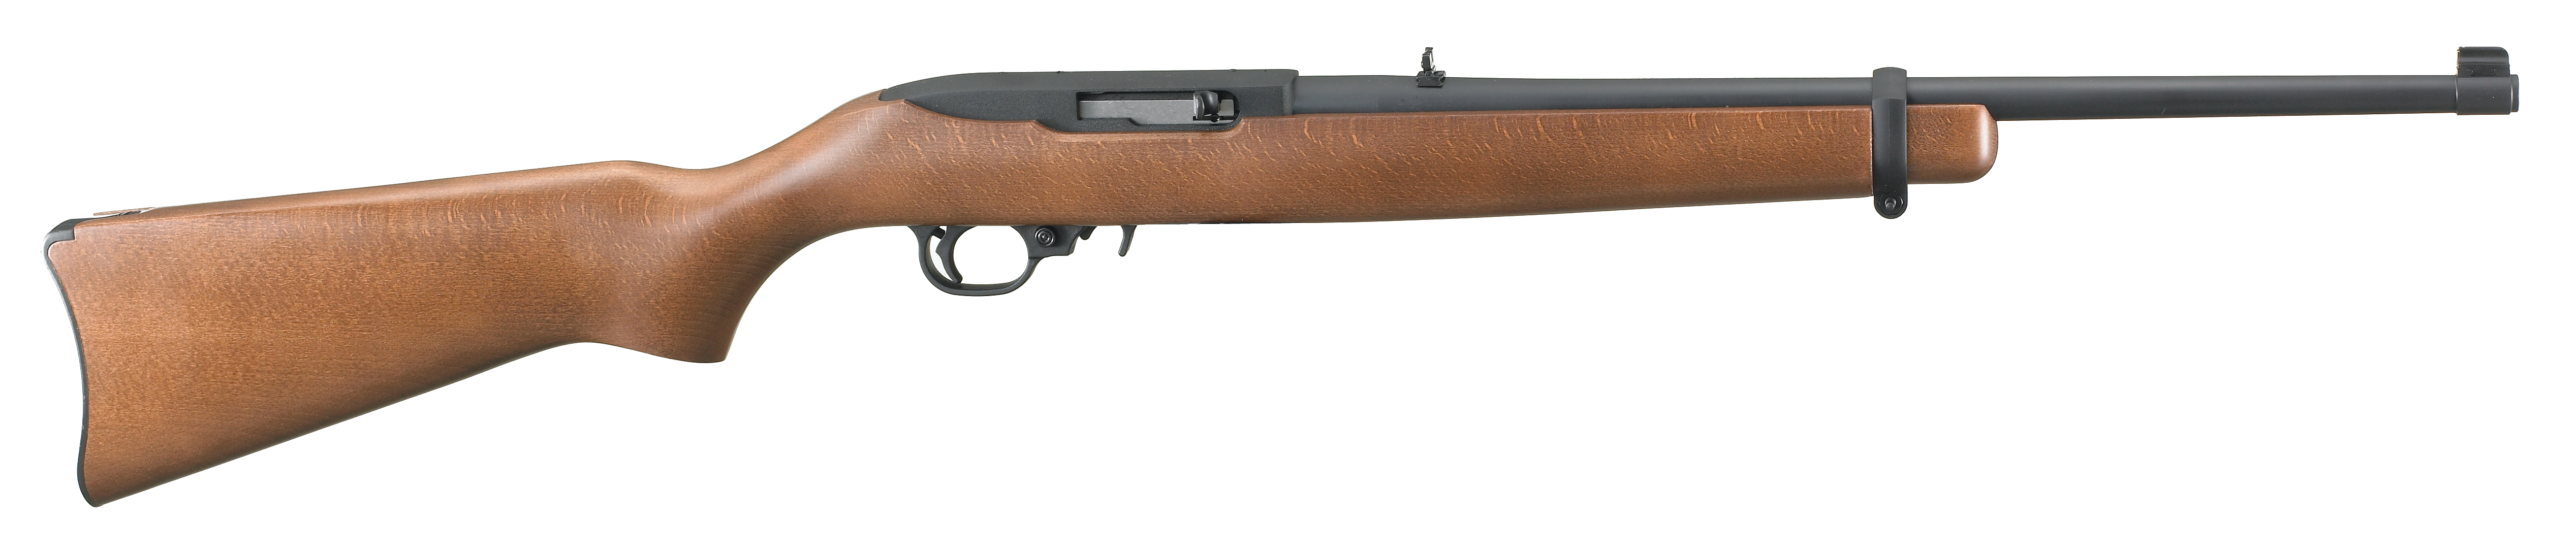 Weapons Ruger 10 22 Rifle 5070x1091